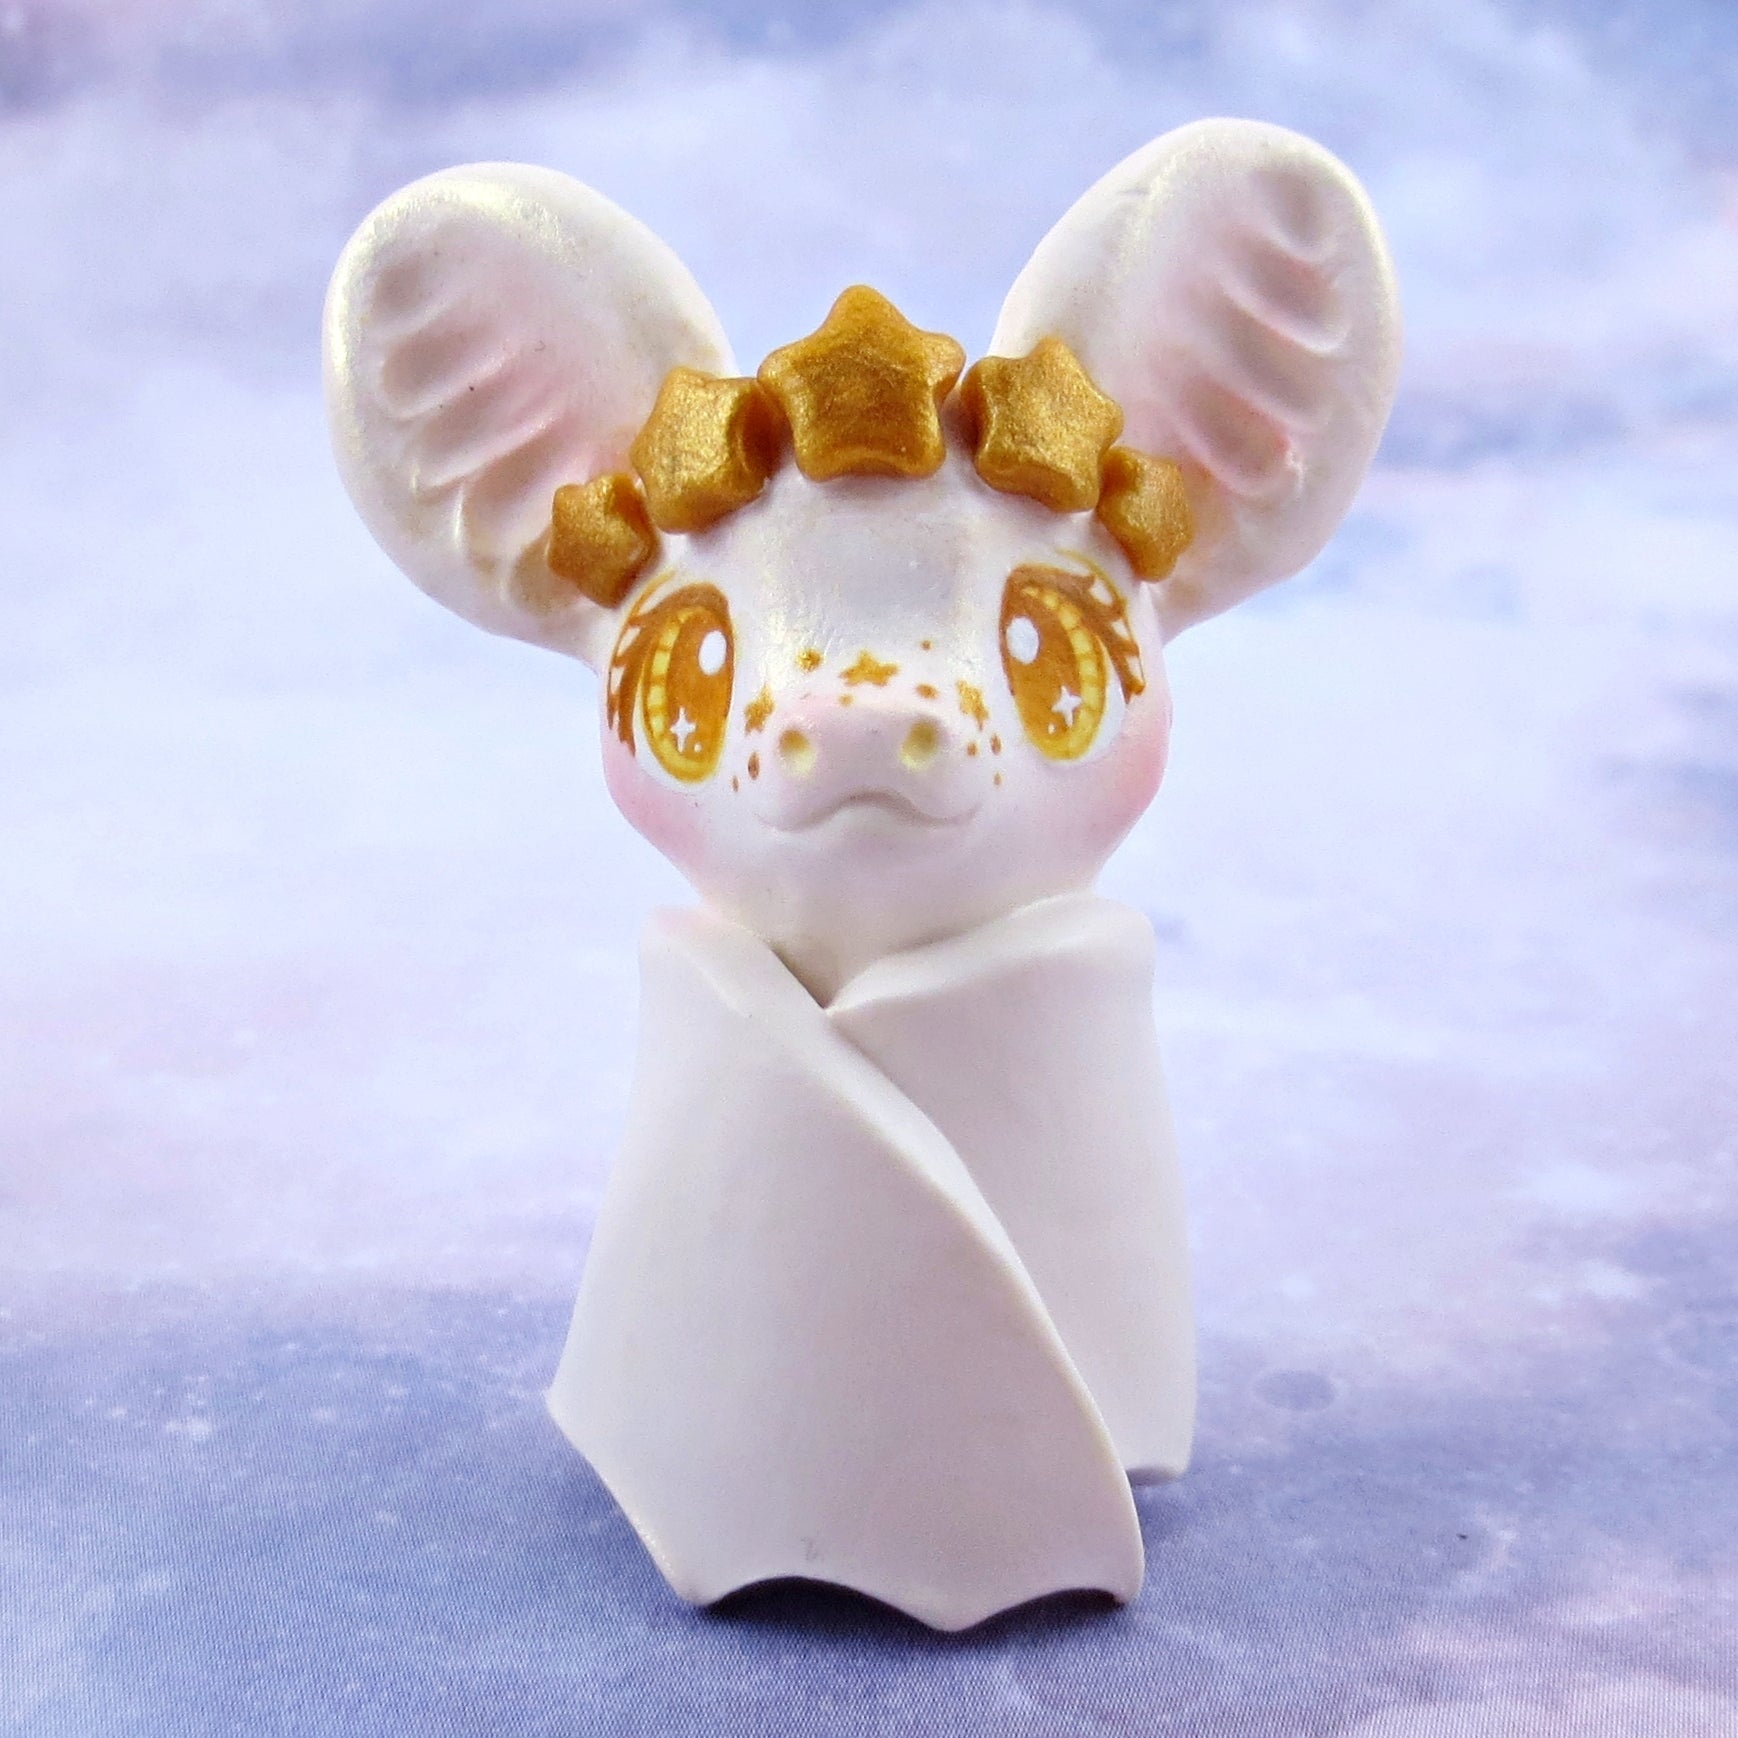 White and Gold Star Crown Bat Figurine - Polymer Clay Animals Celestial Collection